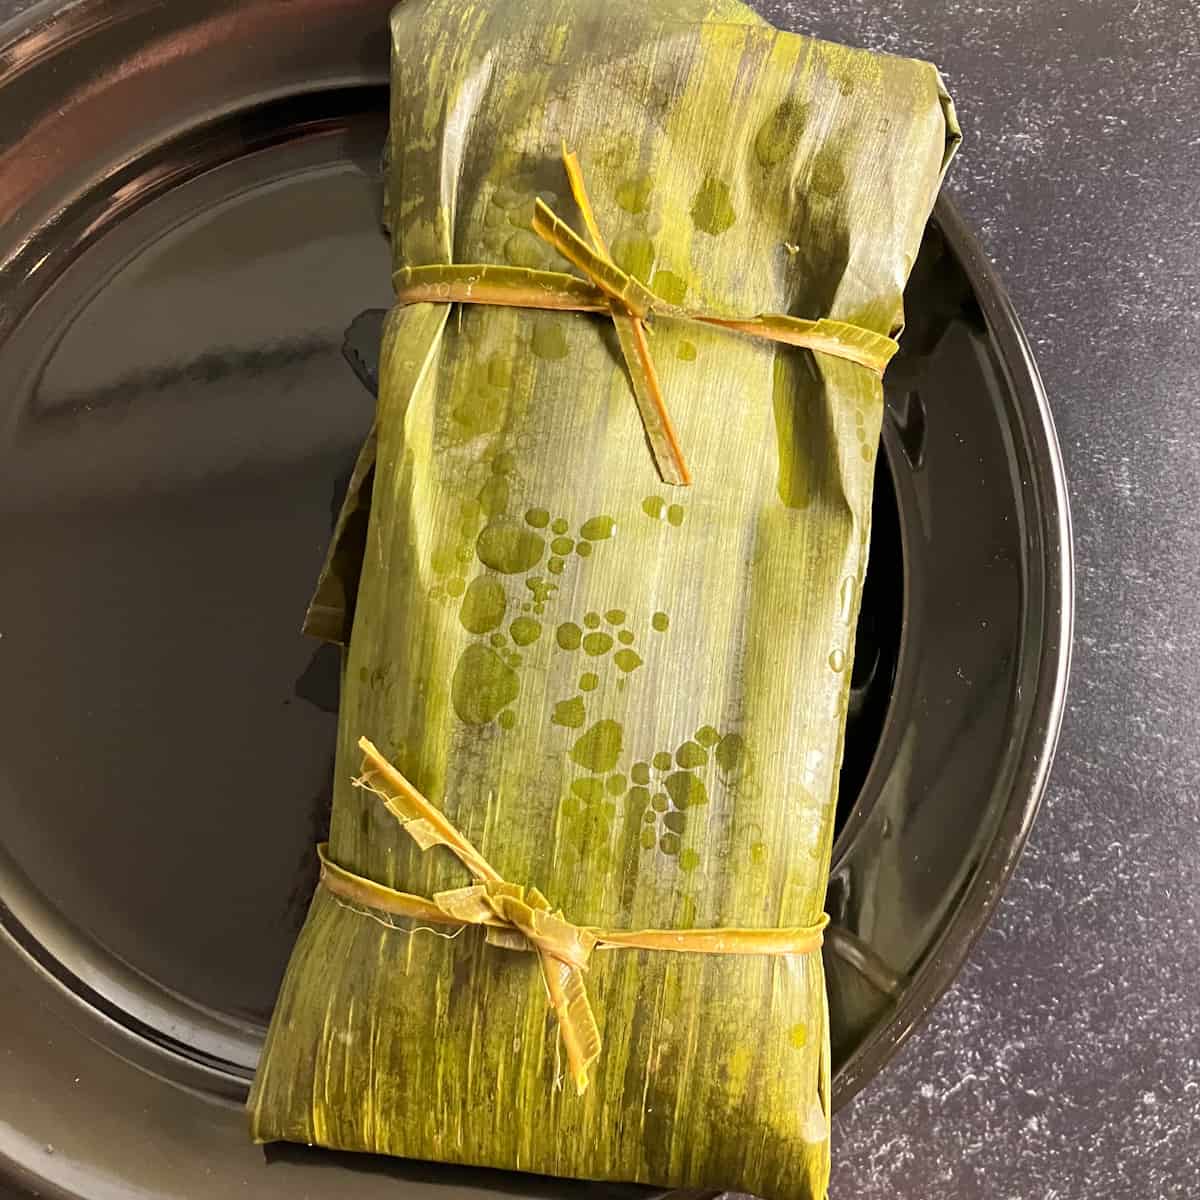 fish wrapped in banana leaves